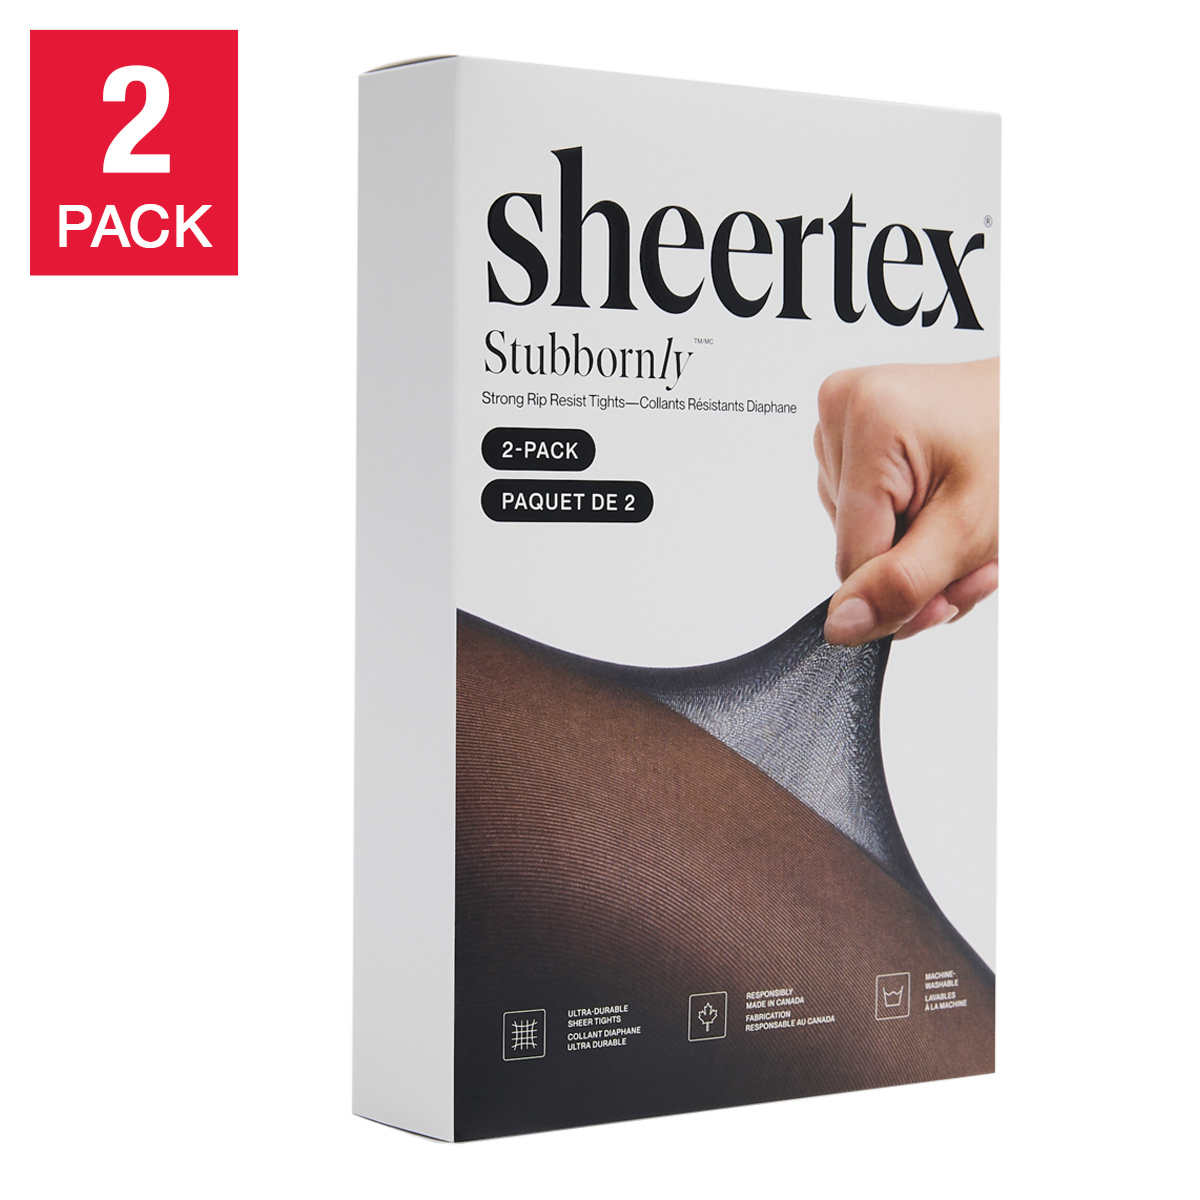 Sheertex Stubbornly Strong Sheer Tights 2-pack